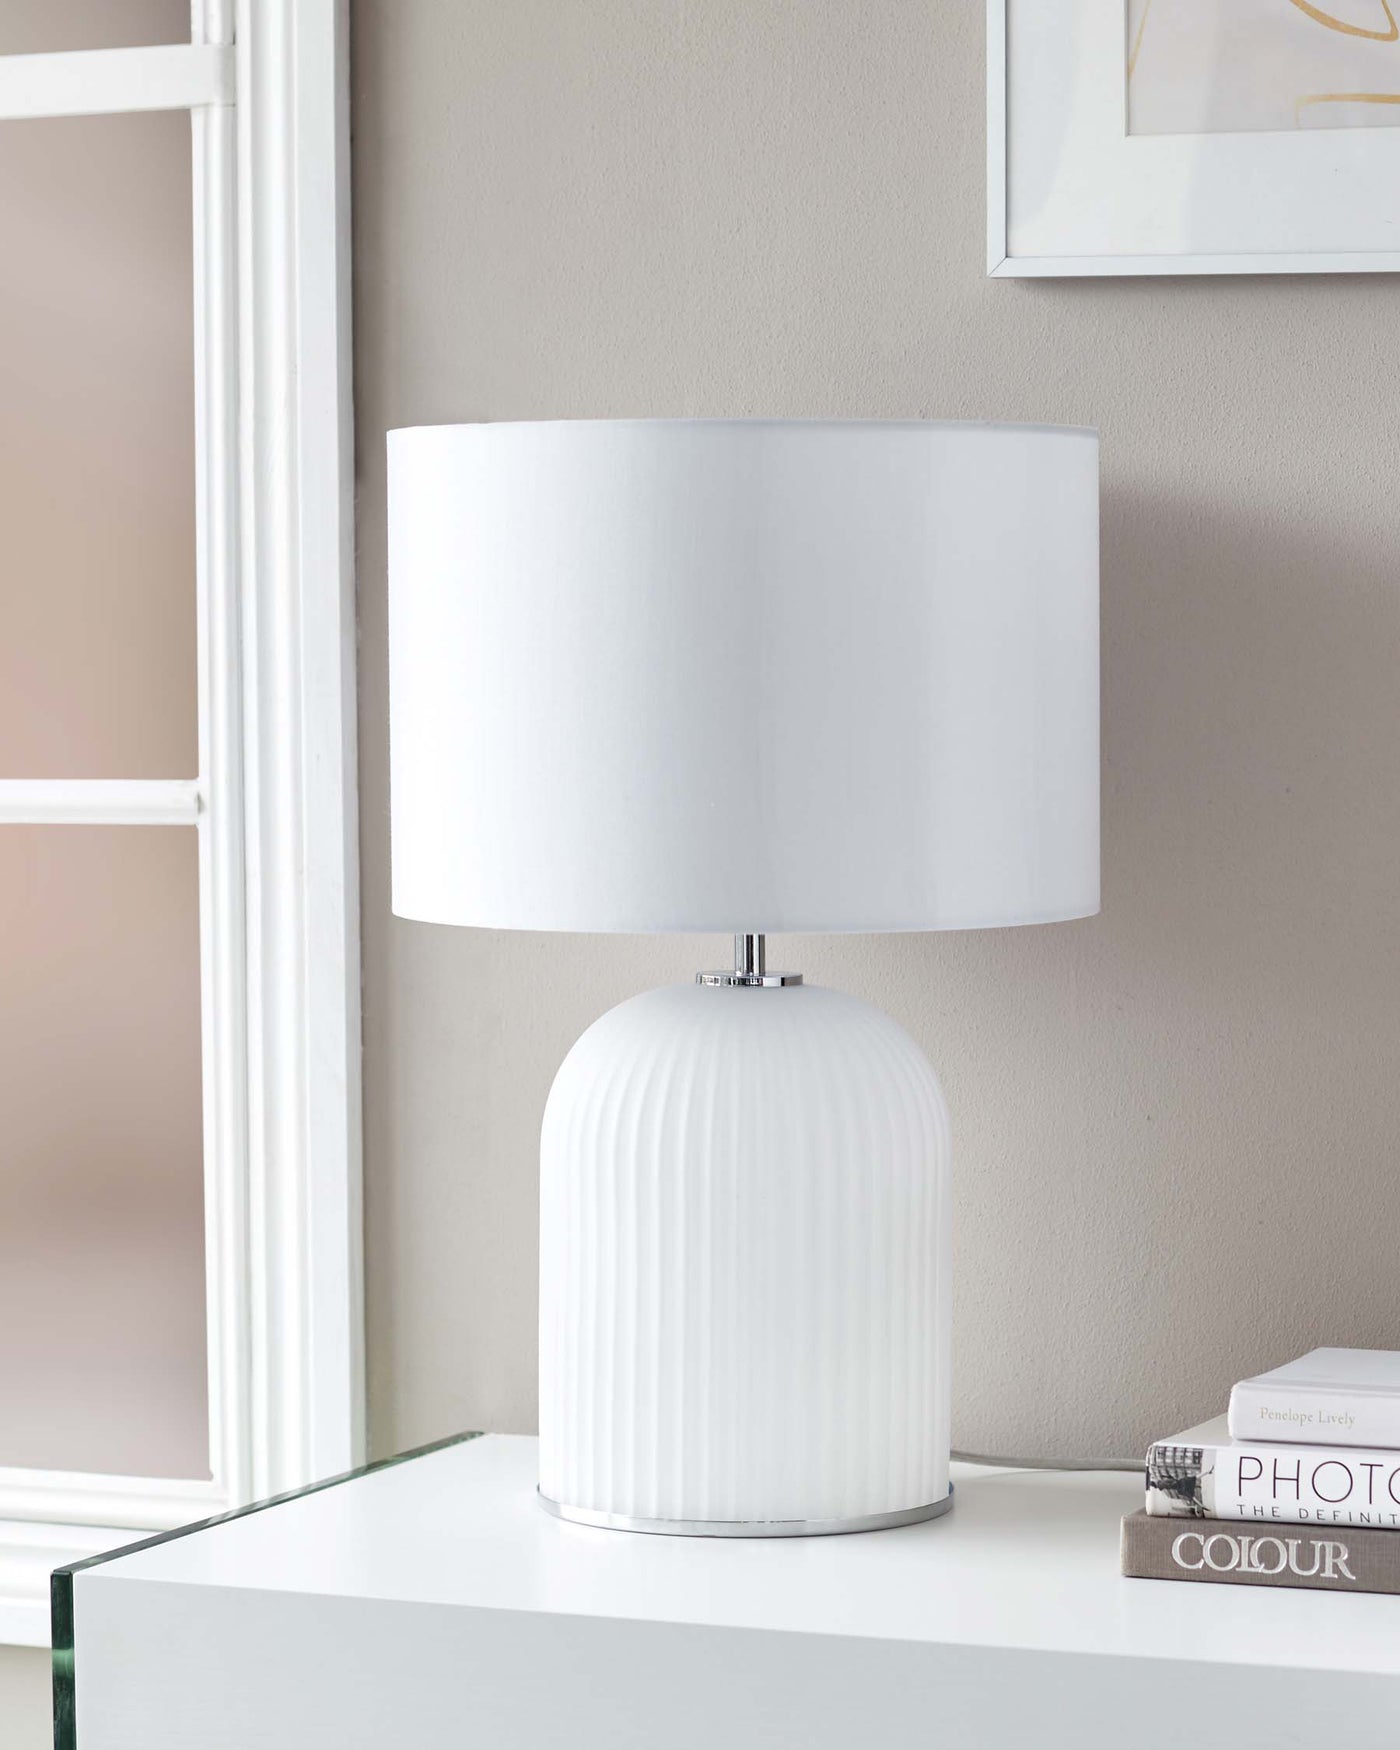 Elegant white table lamp with a cylindrical, ribbed base and a smooth, wide drum shade, displayed on a sleek, reflective glass table.